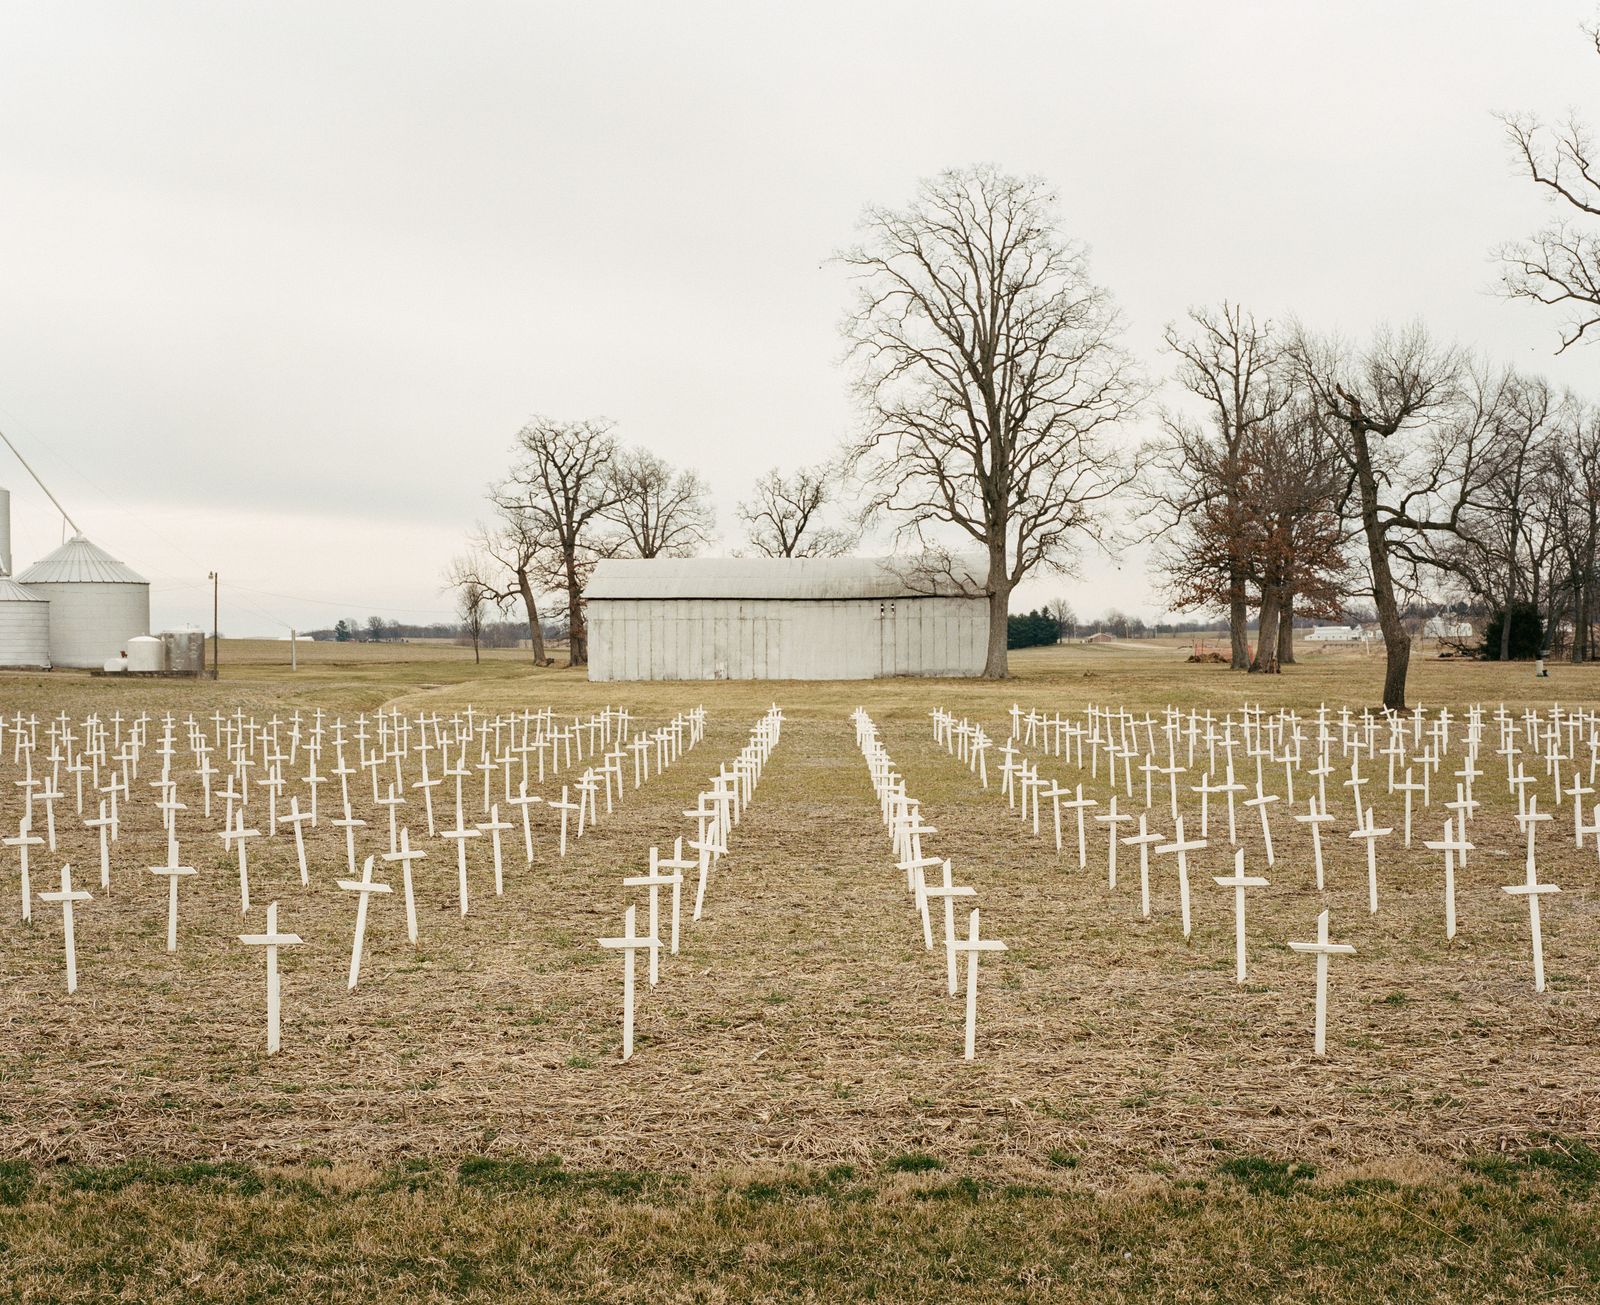 © Bailey Quinlan - “Cemetery of the Innocents” installed by anti-choice activists to memorialize aborted fetuses - Gibson County, IN